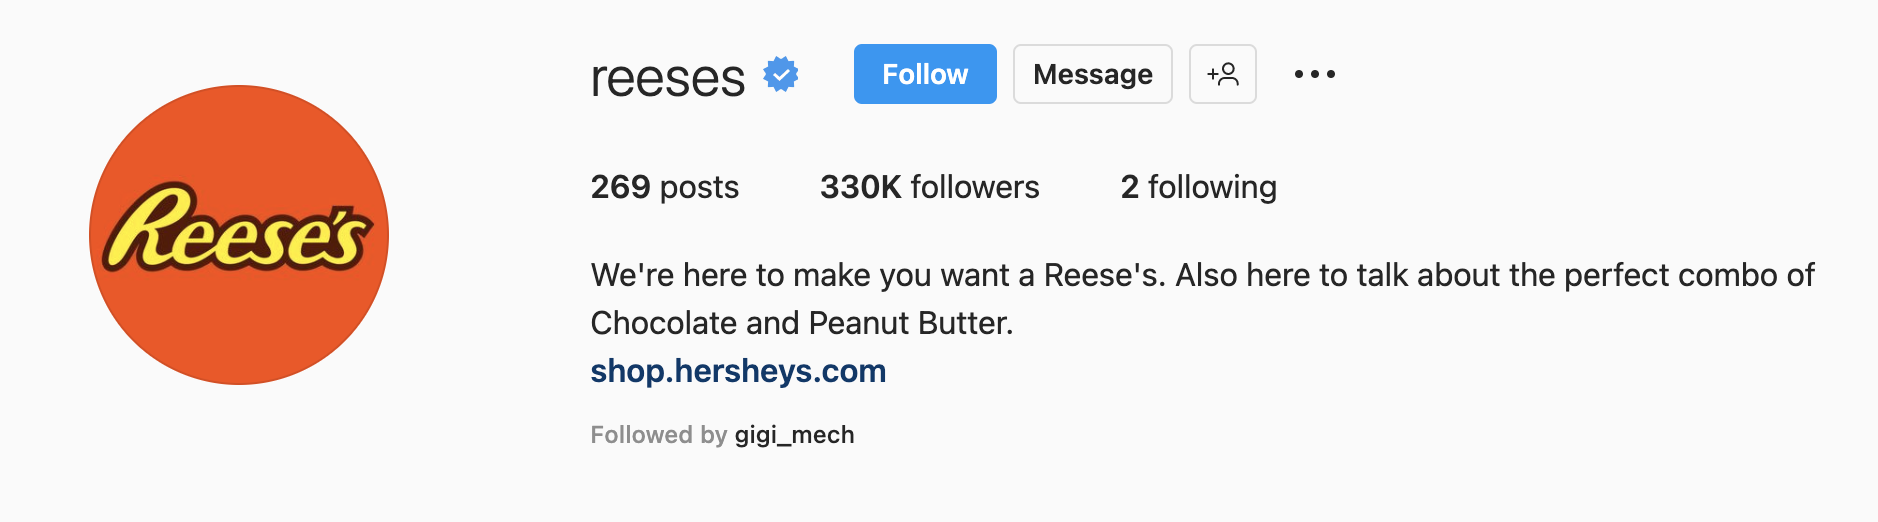 An Instagram bio example from Reese's